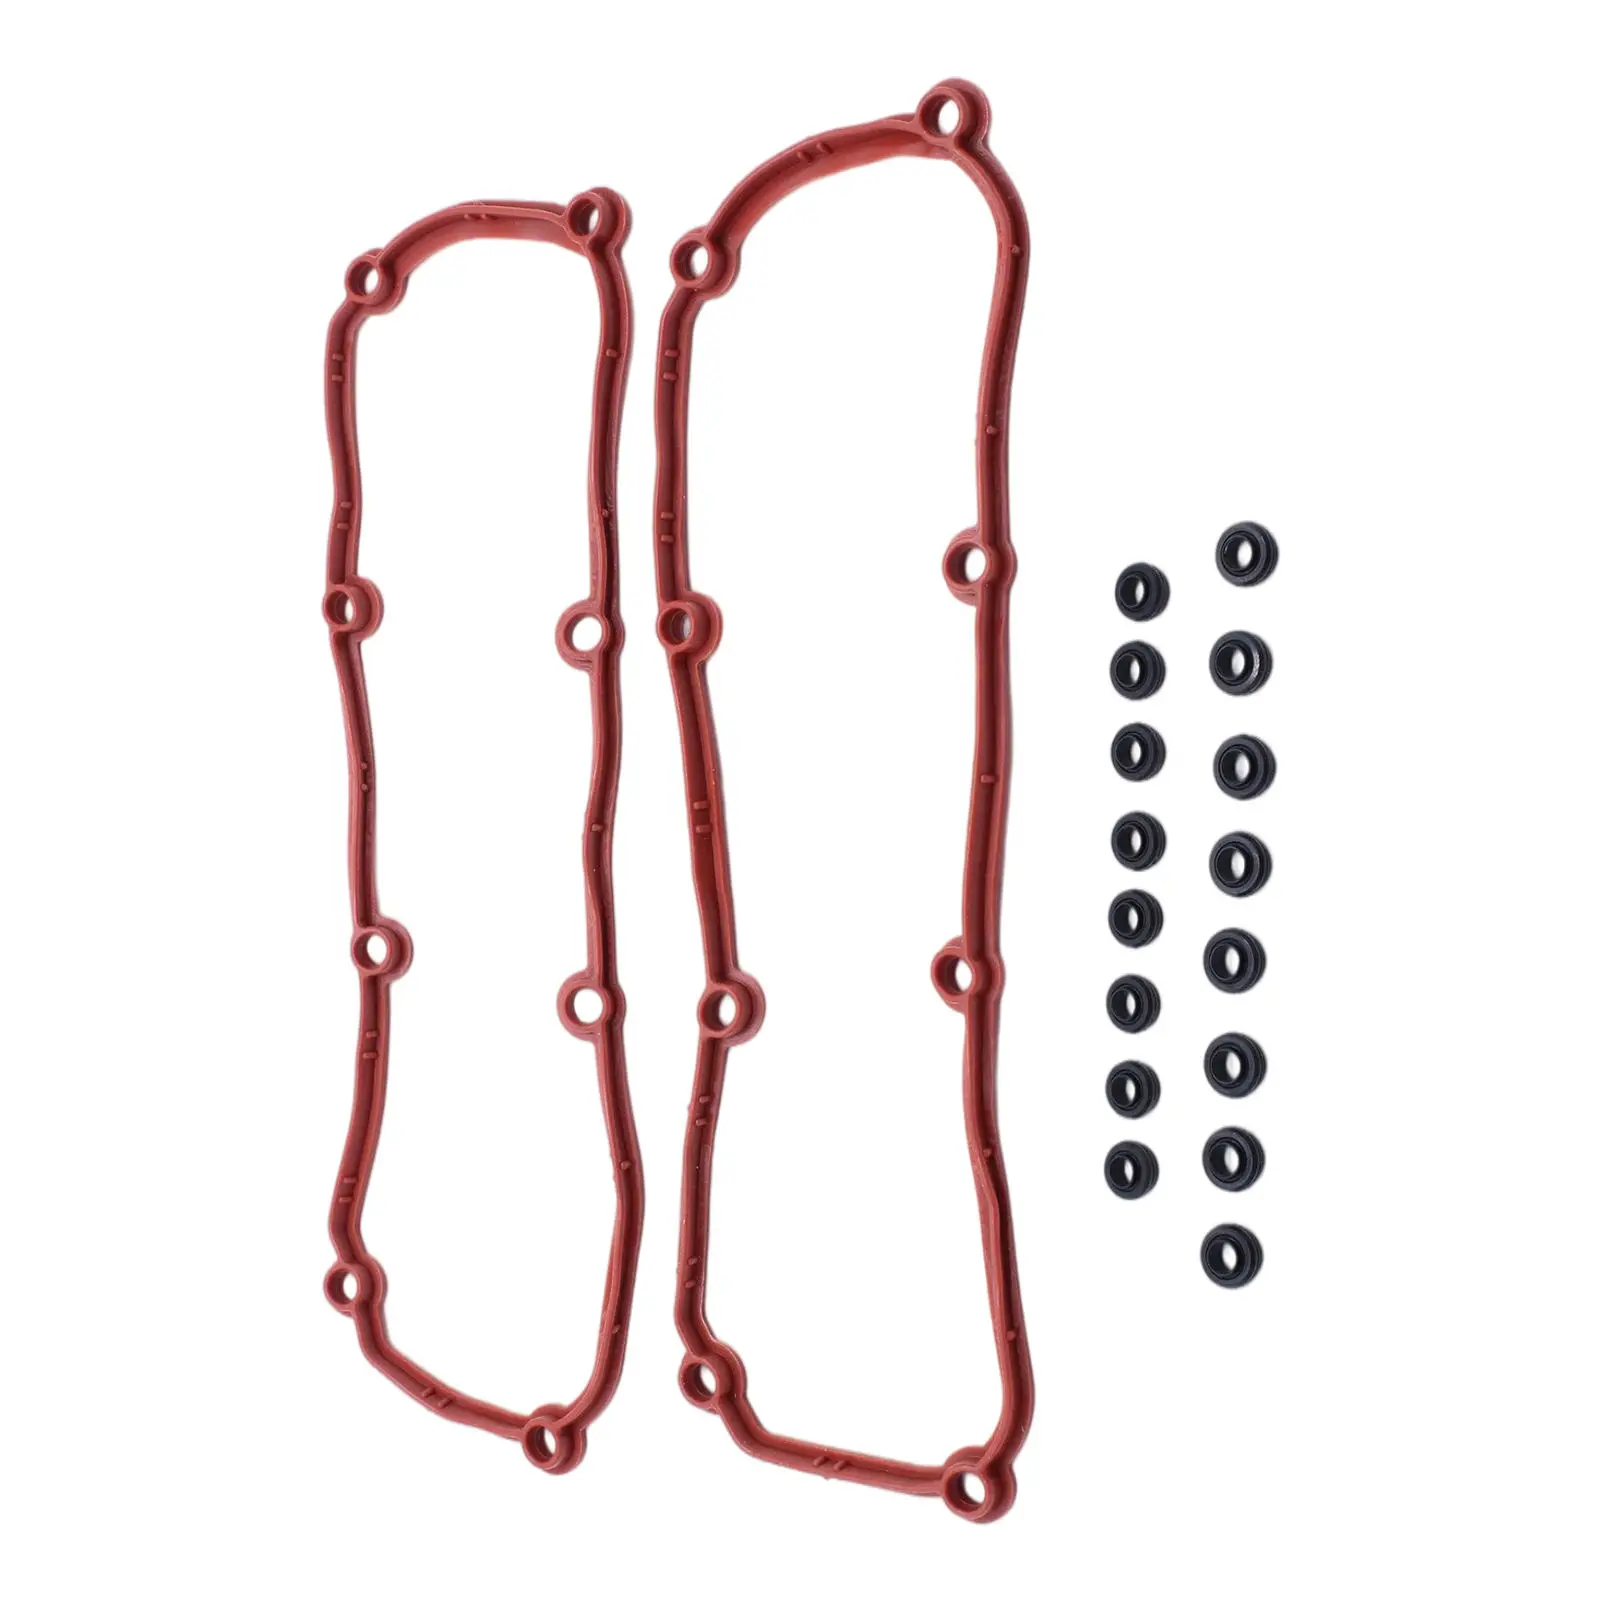 2x Valve Cover Gasket Automotive Engine Kit Replace for Grand Caravan Chrysler 12 Valve Town & Country 05-10